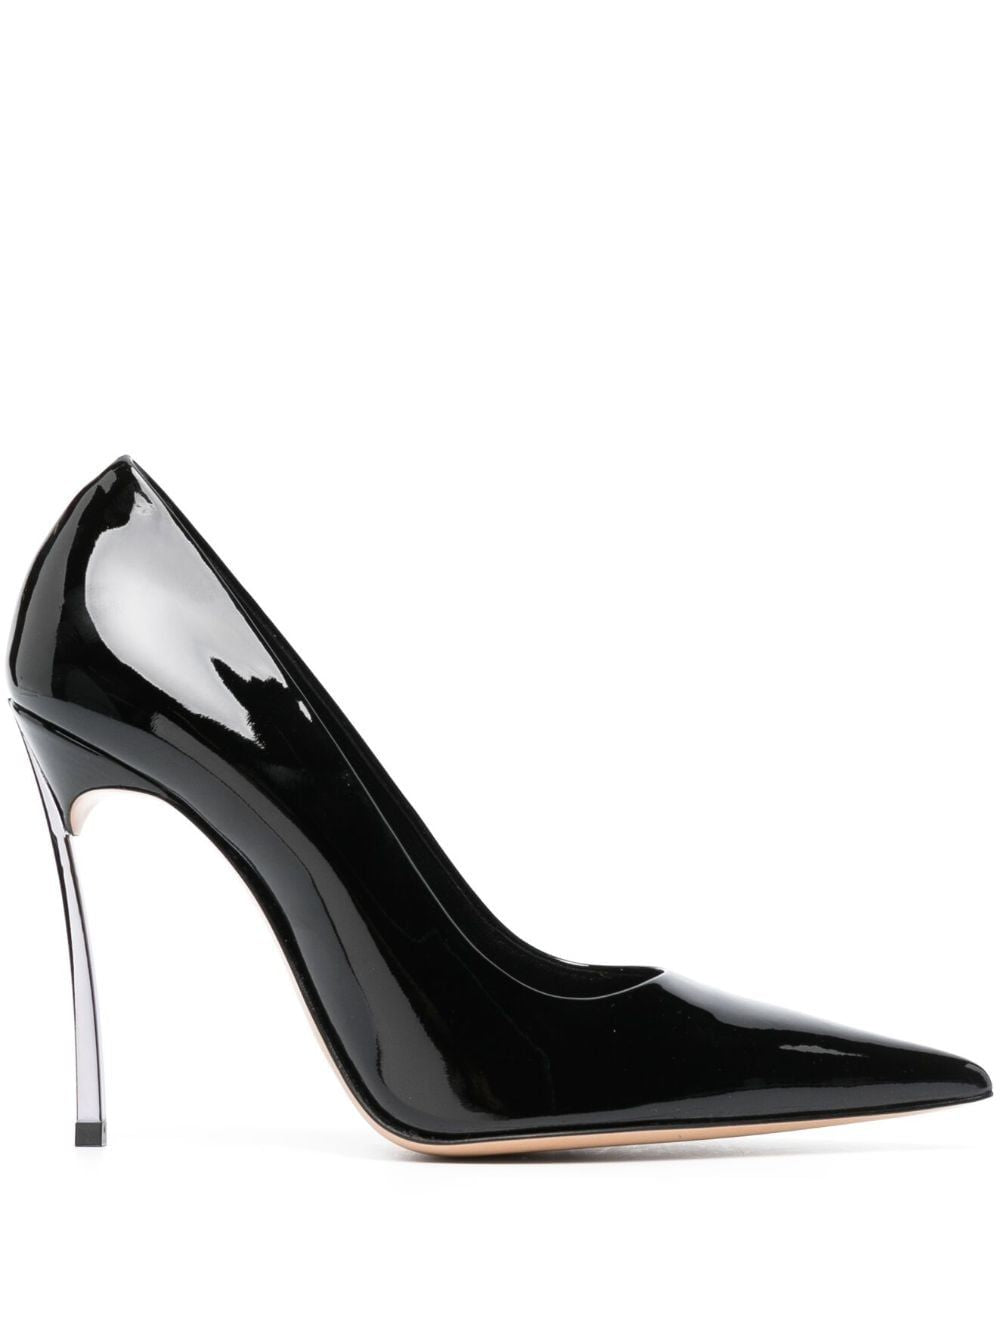 Casadei Classy Black Leather Pointed Toe Pumps For Women